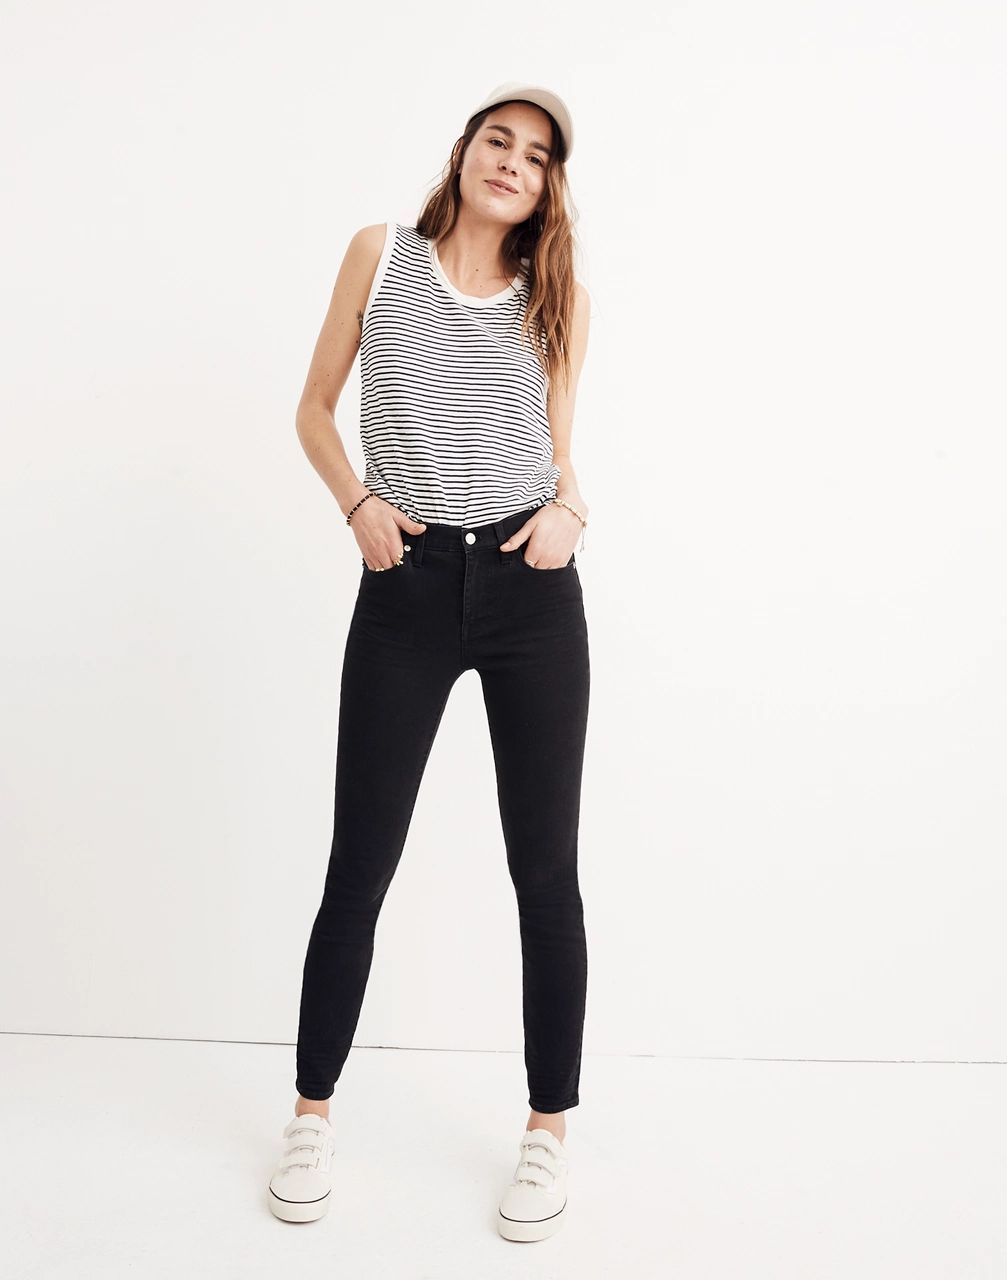 Taller 9" High-Rise Skinny Jeans in Lunar | Madewell